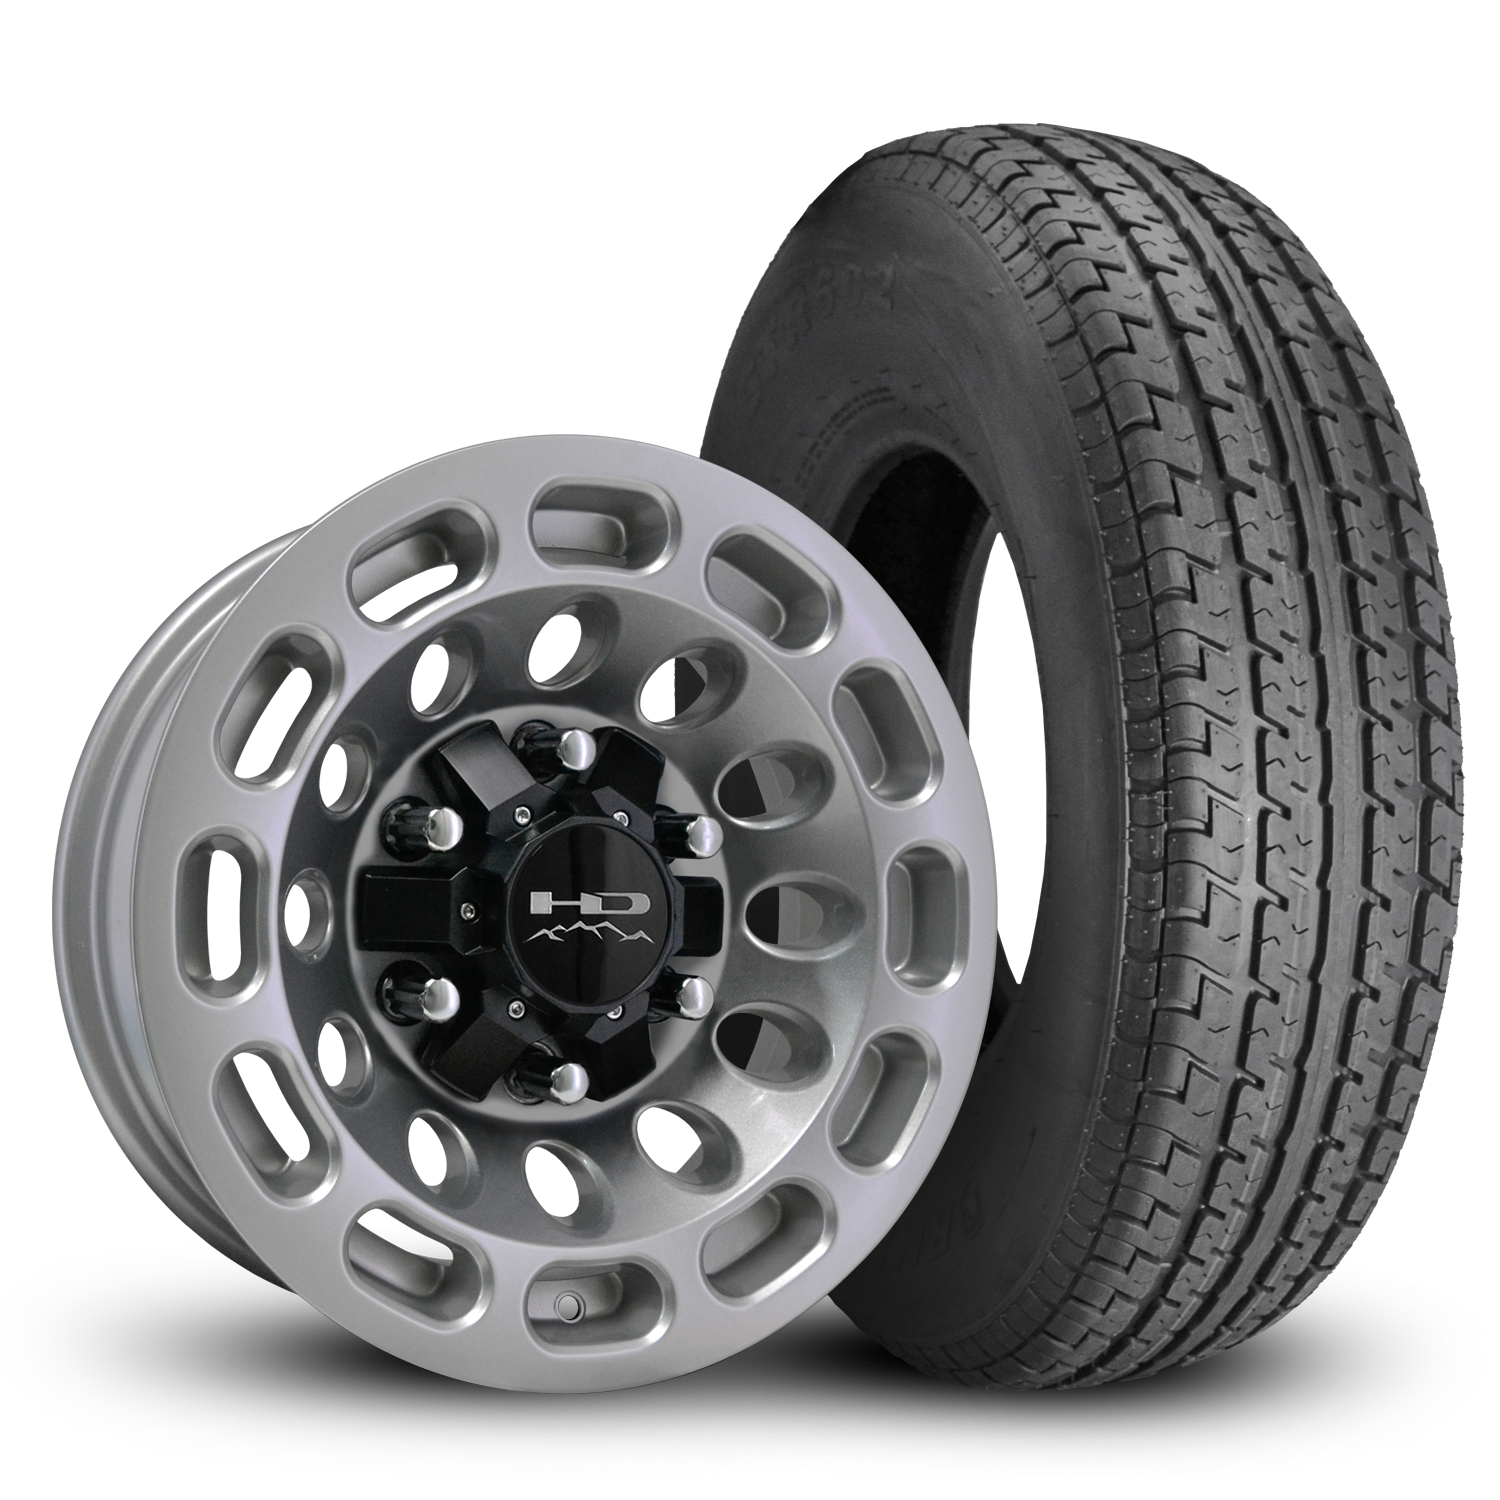 HD Off-Road Road Warrior Custom Trailer Wheel & Tire packages in 15x6.0 in 6 lug All Gloss Silver for Unility, Boat, Car, Construction, Horse, & RV